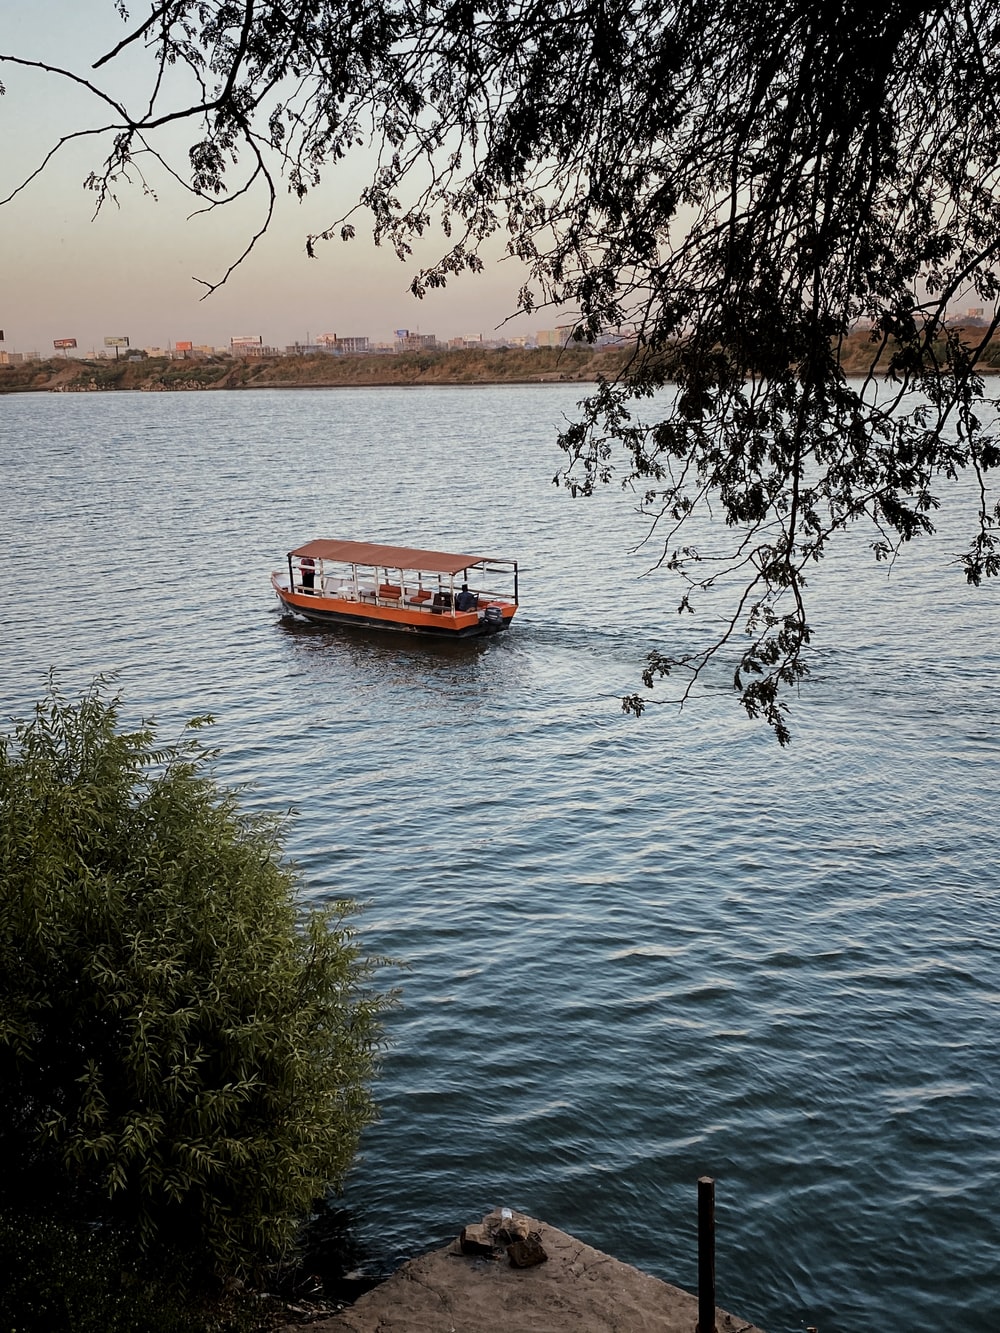 Nile River Picture. Download Free Image